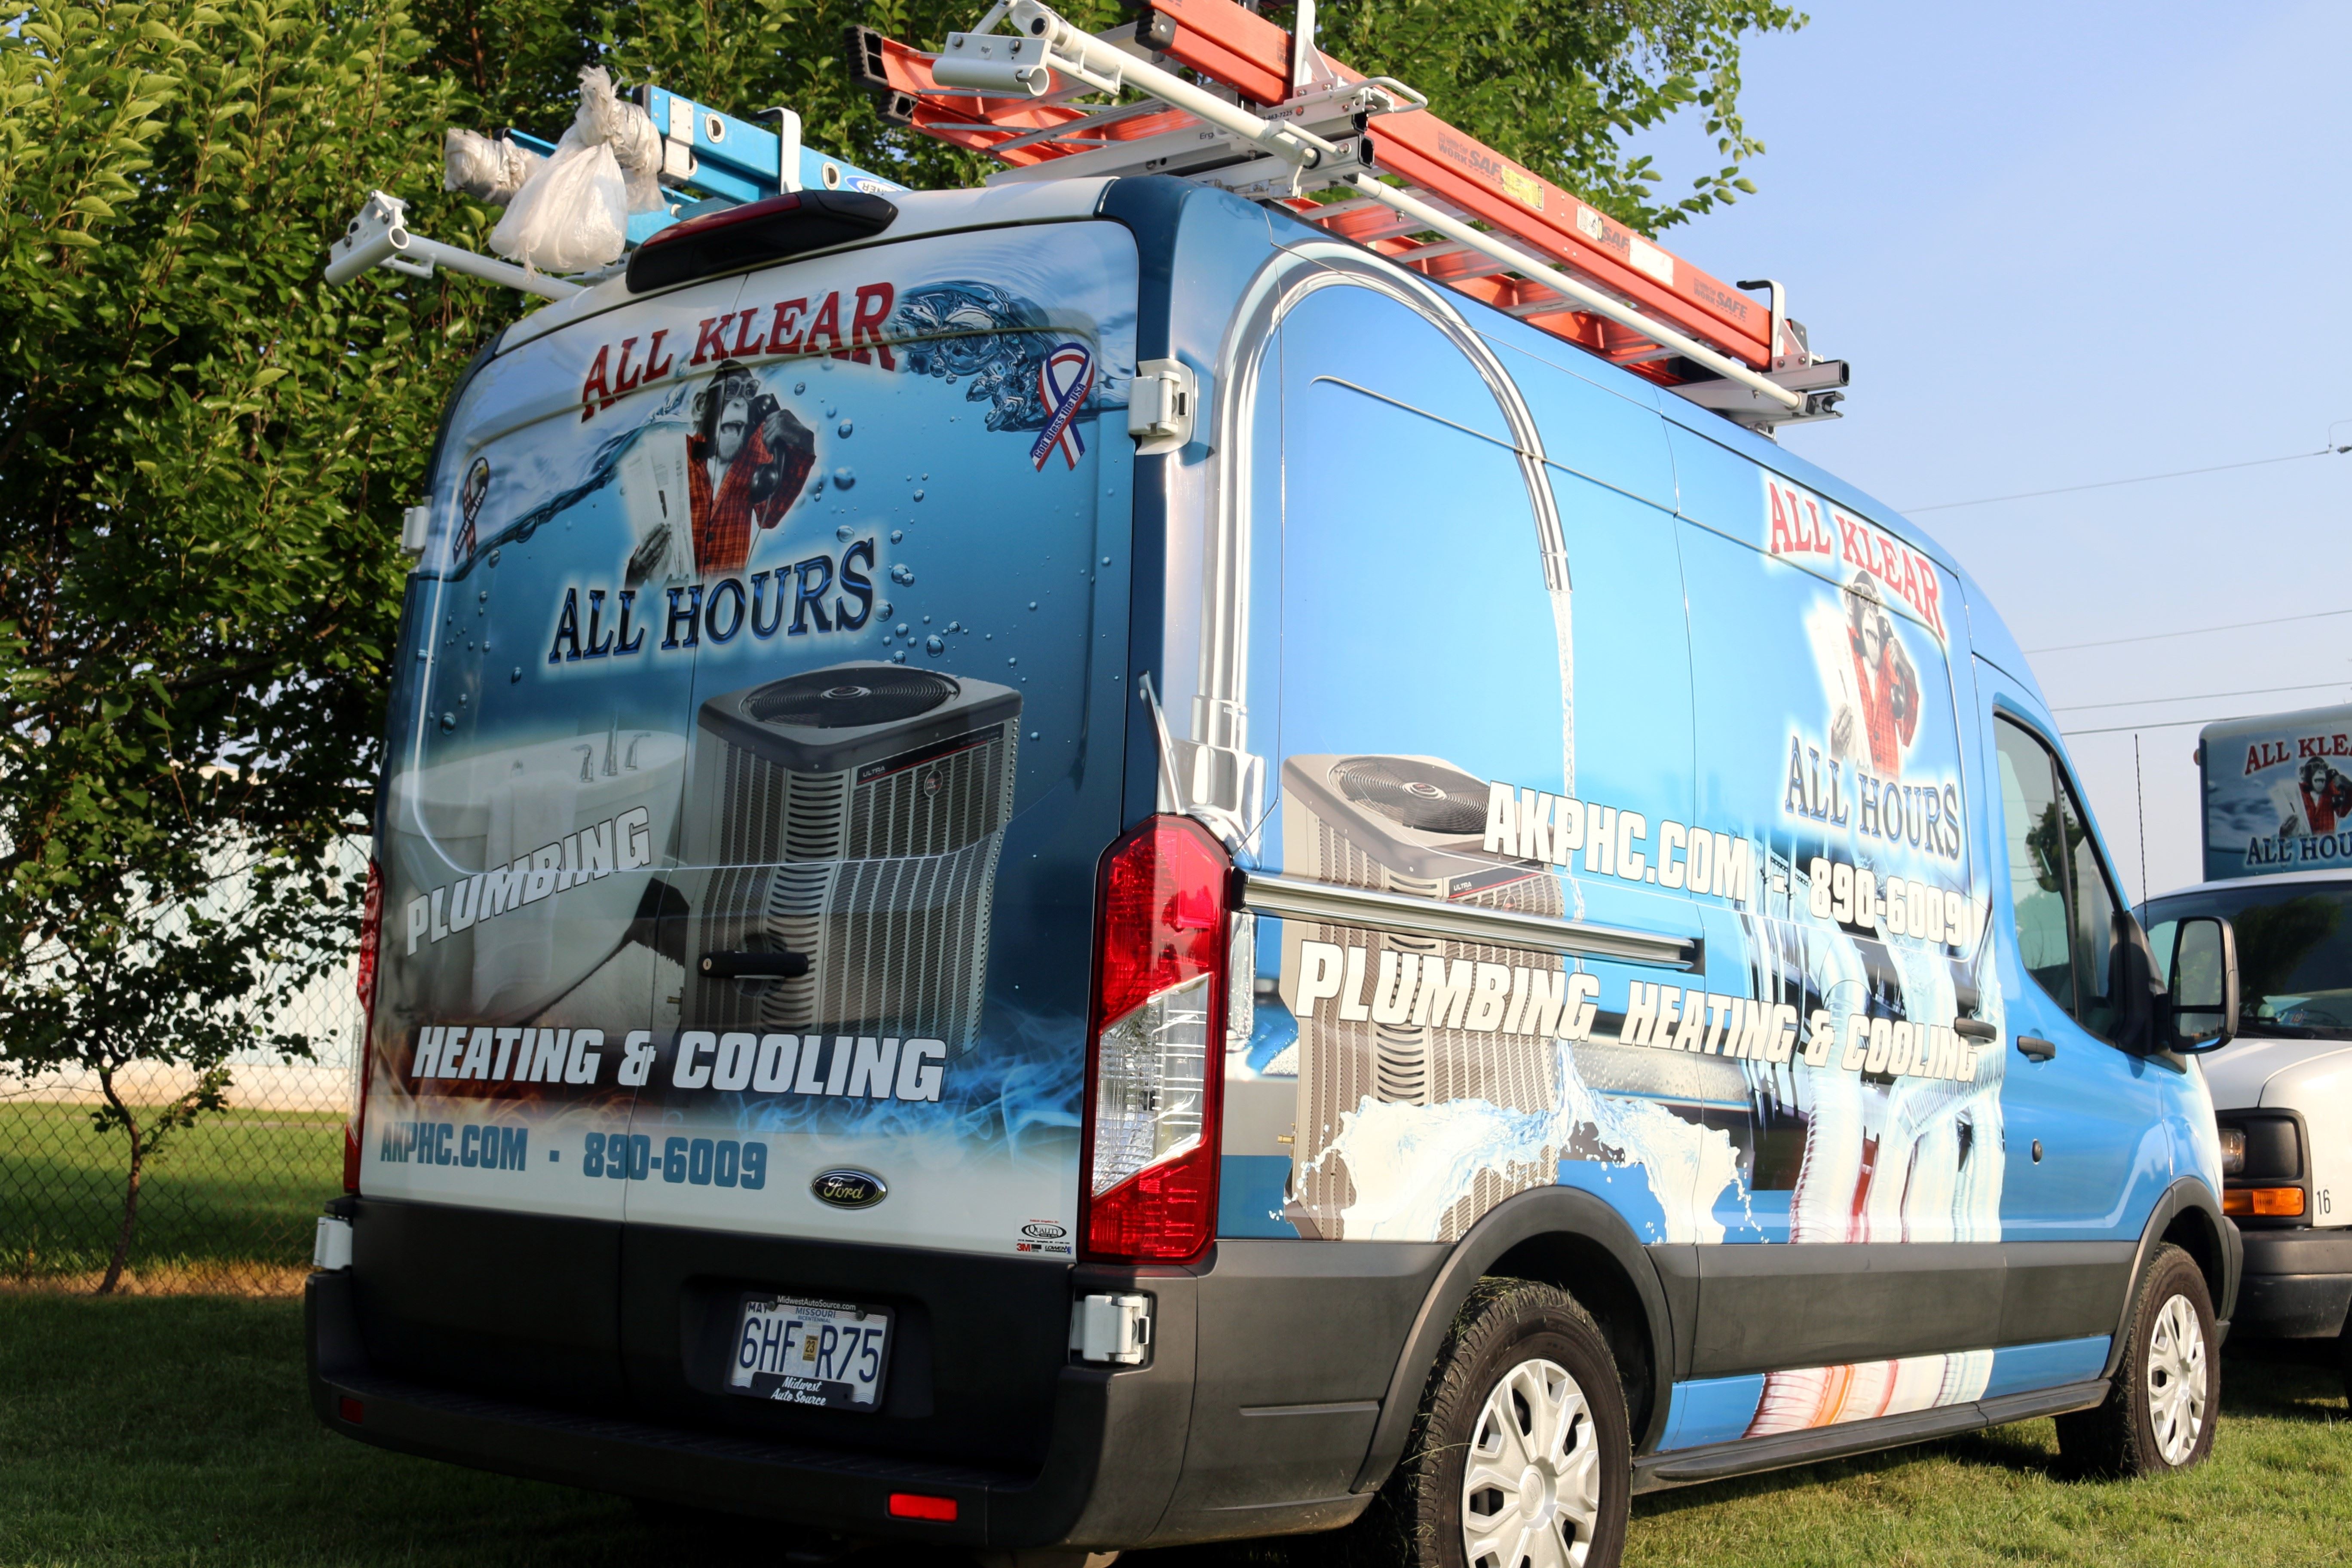 All Klear, Plumbing, Heating and Cooling Trucks